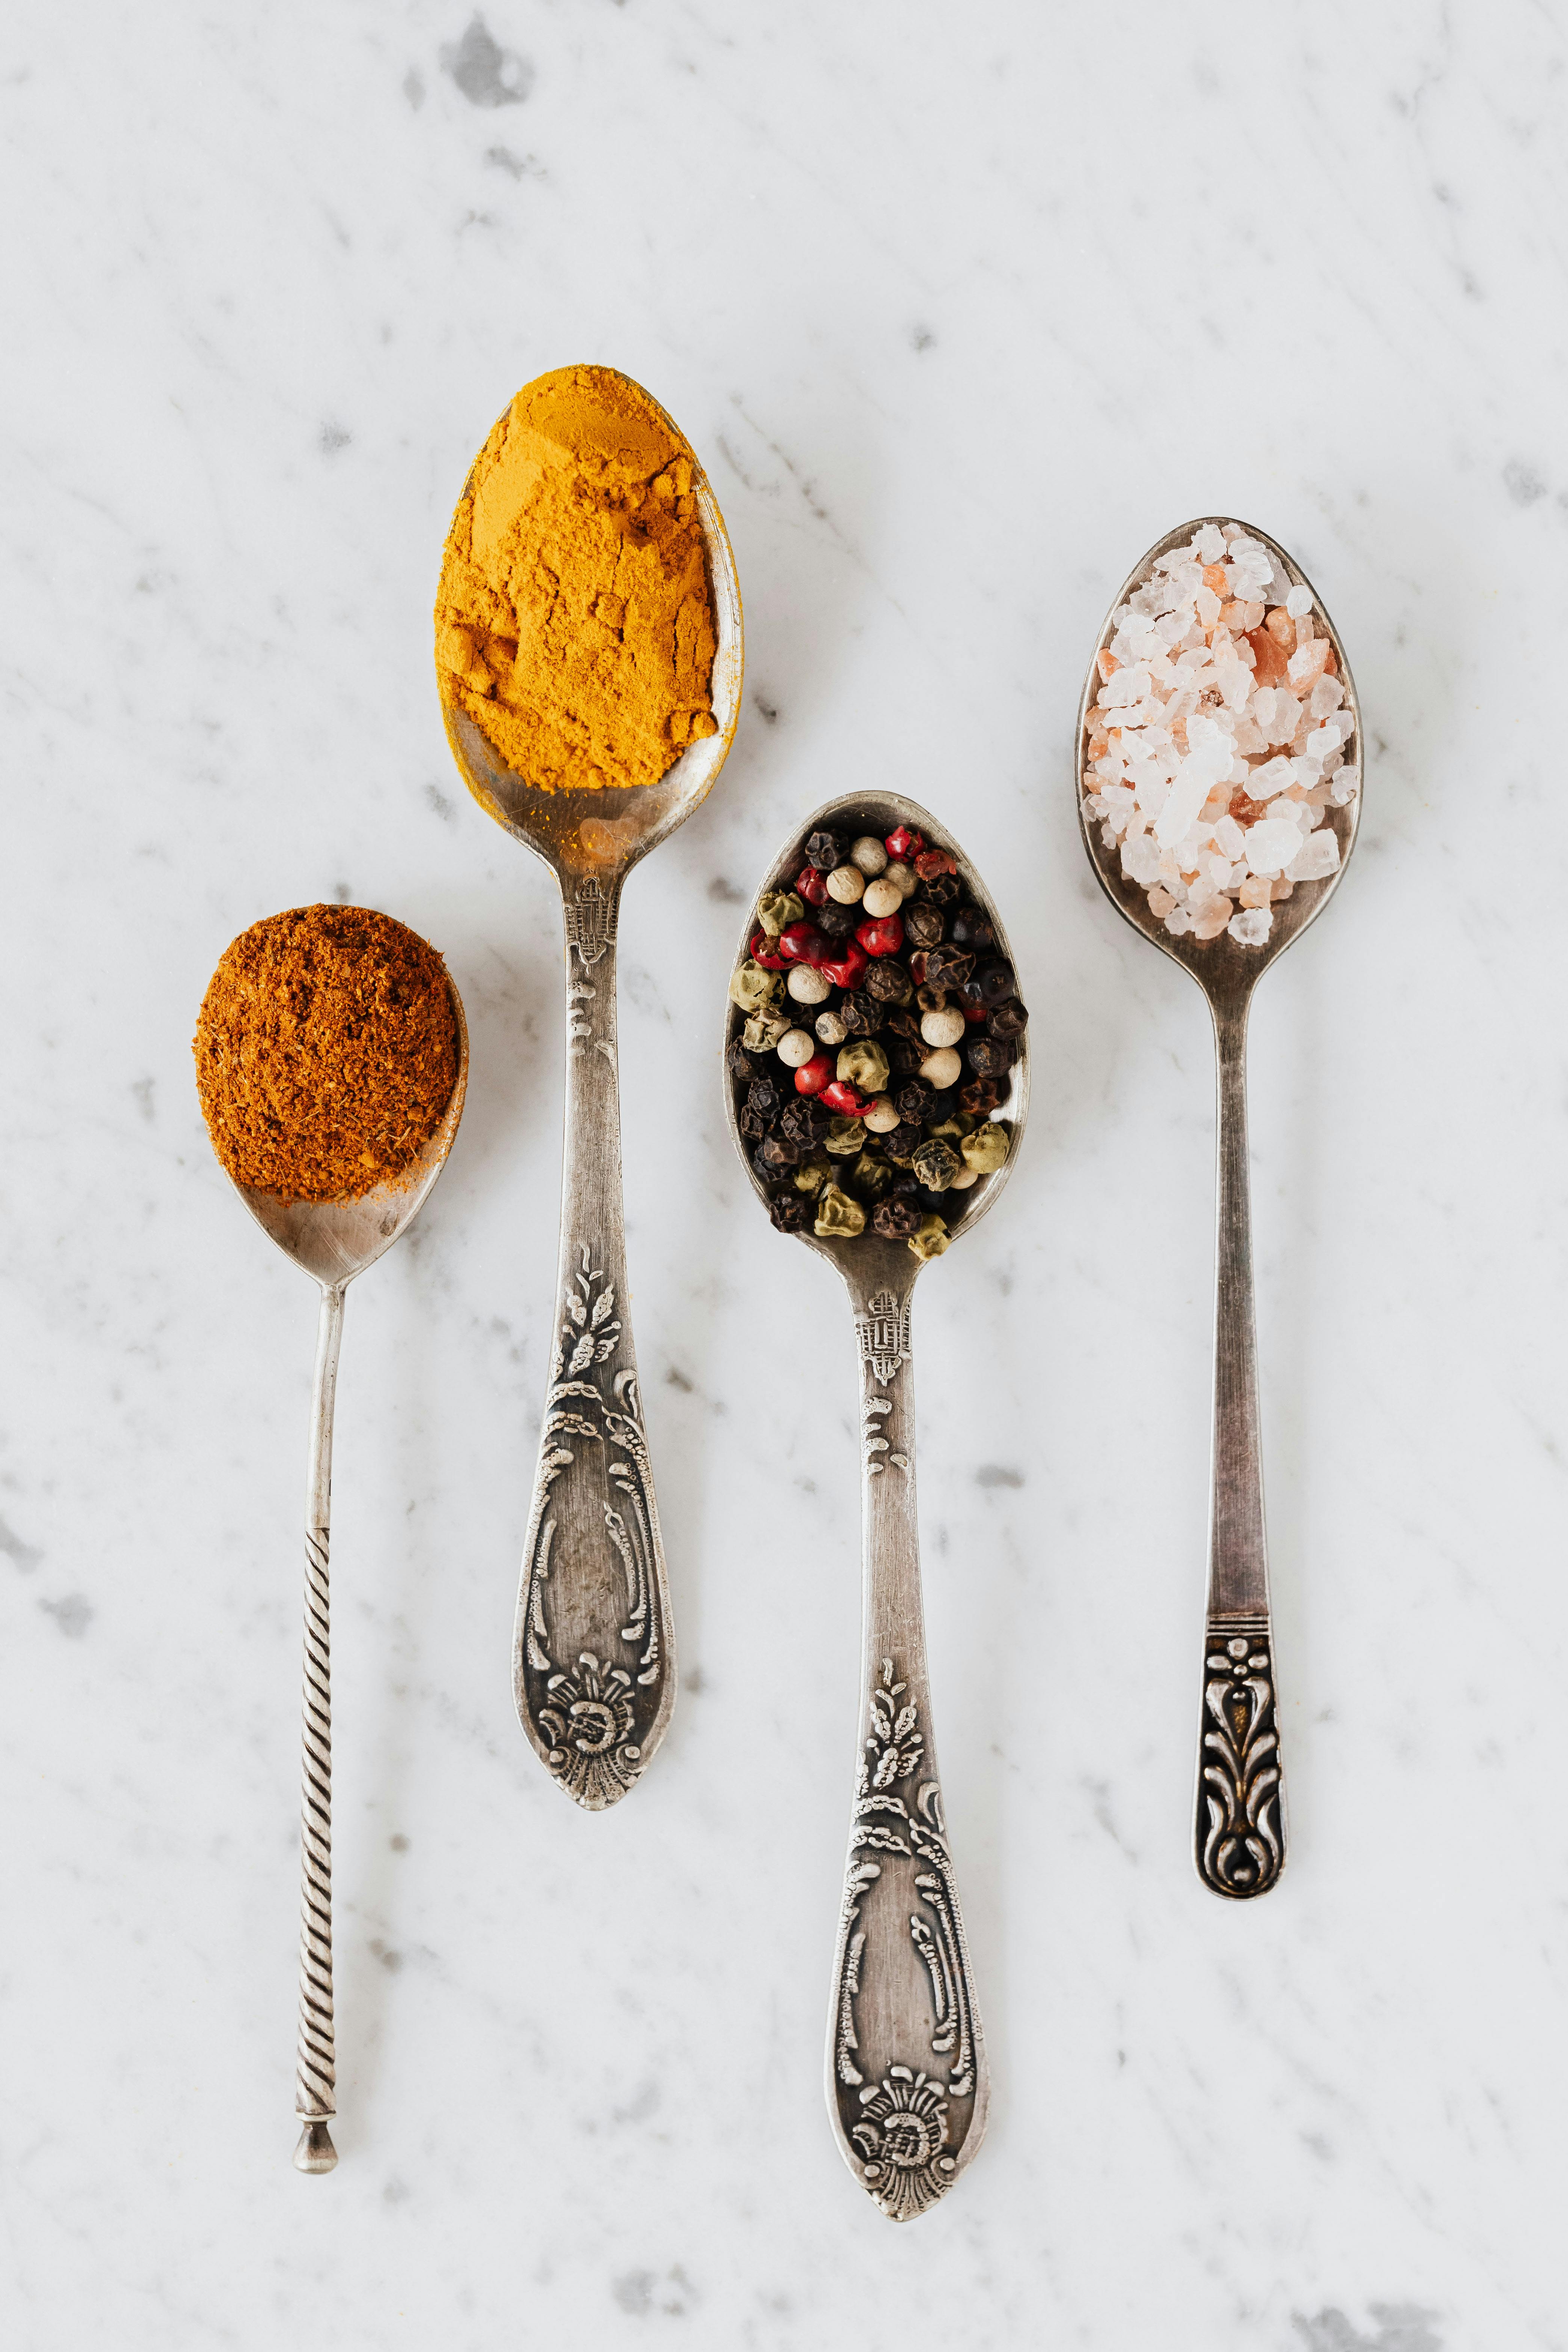 500 Spoon Pictures HD  Download Free Images on Unsplash